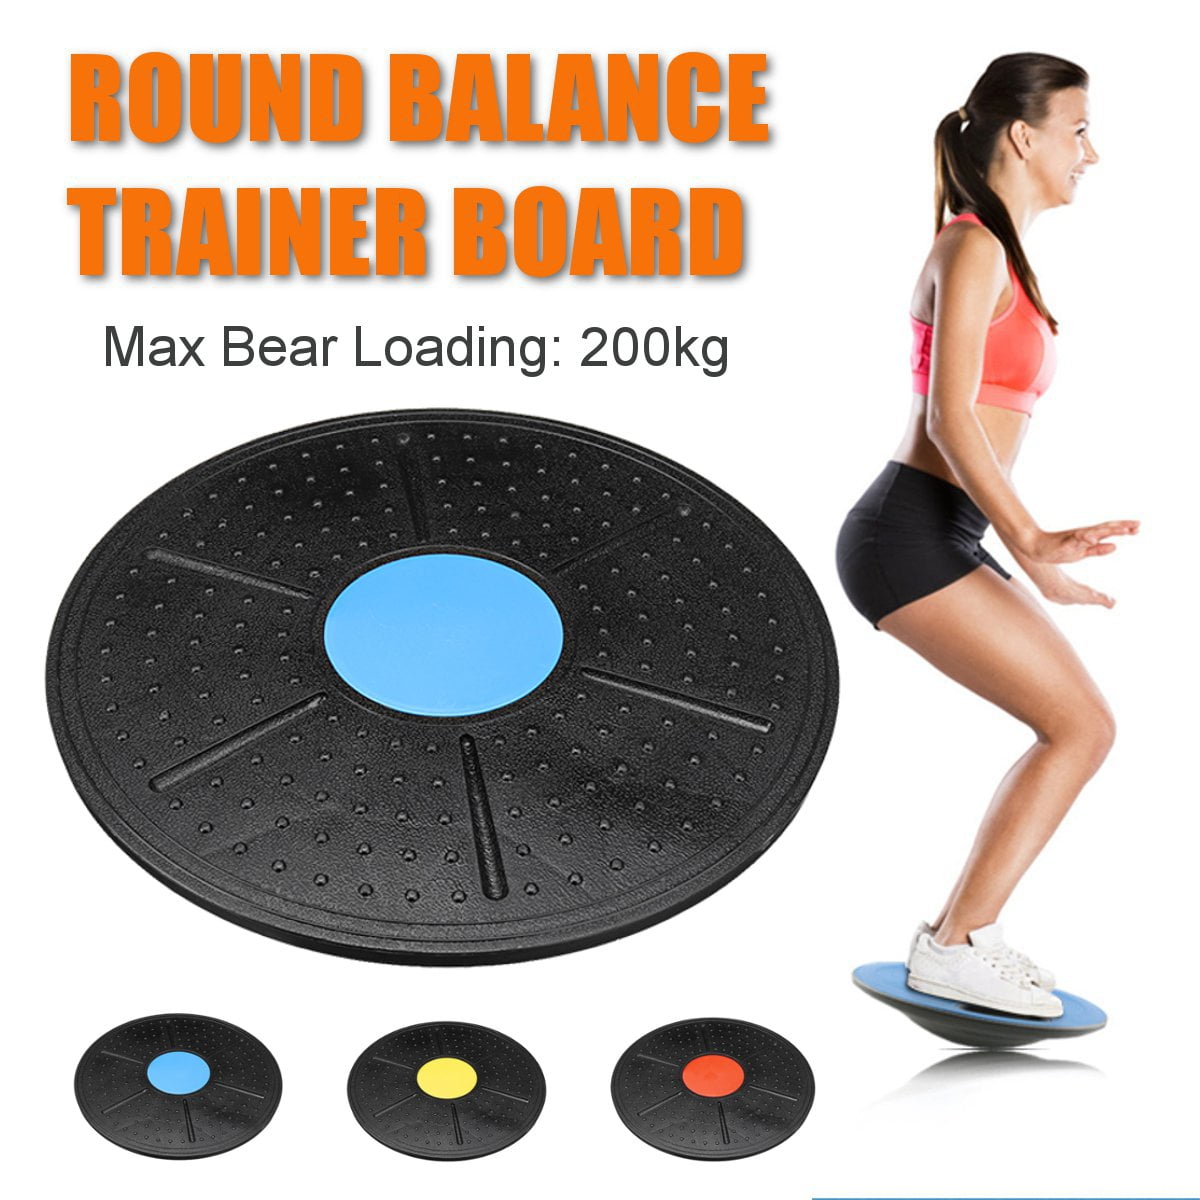 Wobble Balance Board Exercise Balance Stability Trainer for Physical 